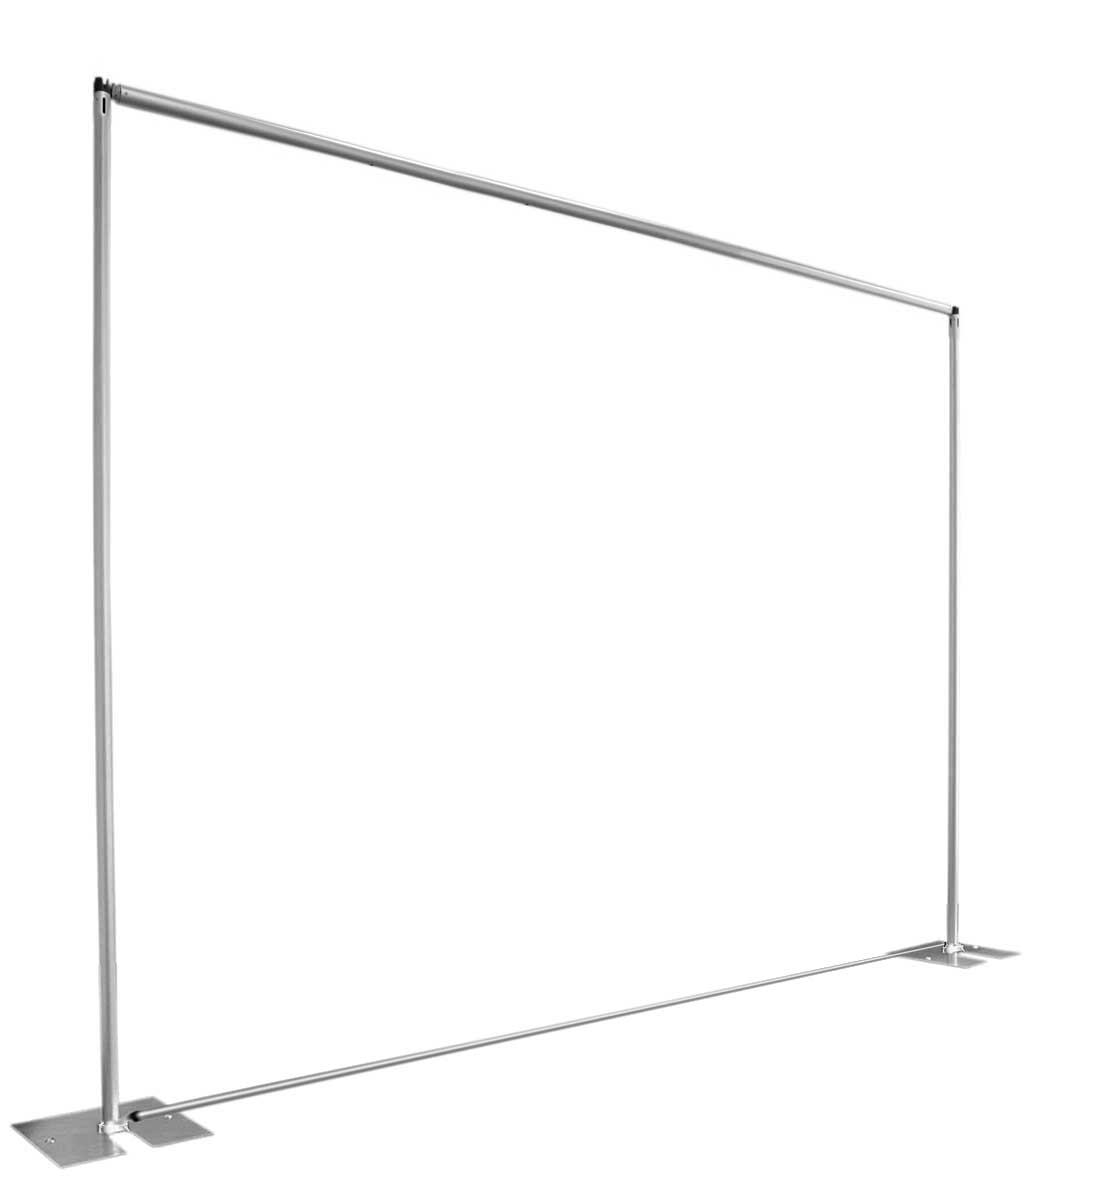 paper softwall folding wall partition, portable folding room divider